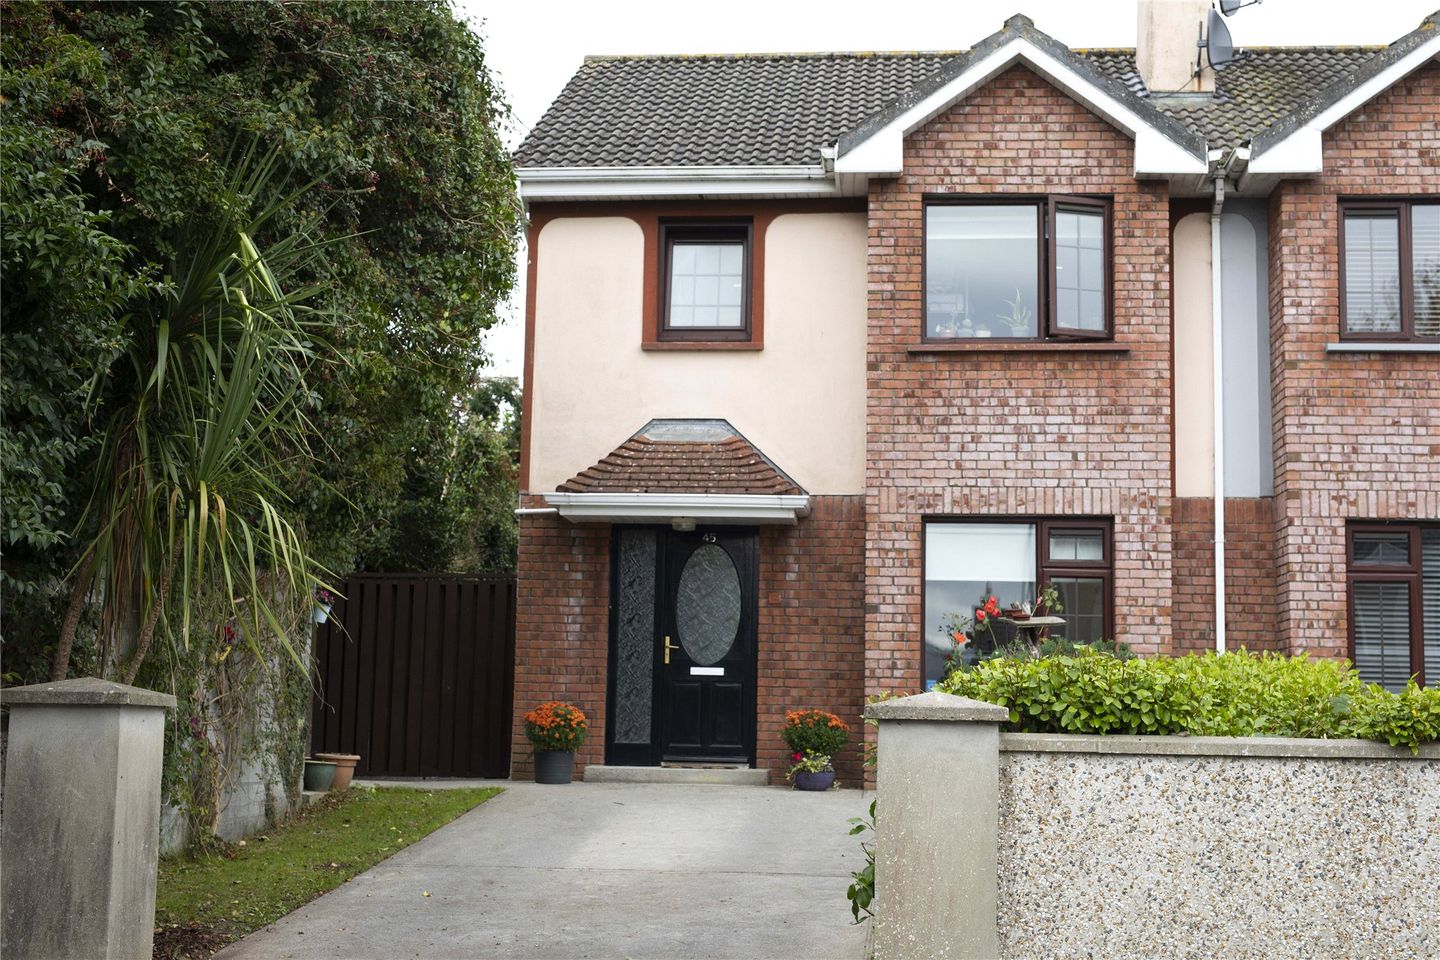 45 Killeen Heights, Killeen, Tralee, Co. Kerry, V92A6D6